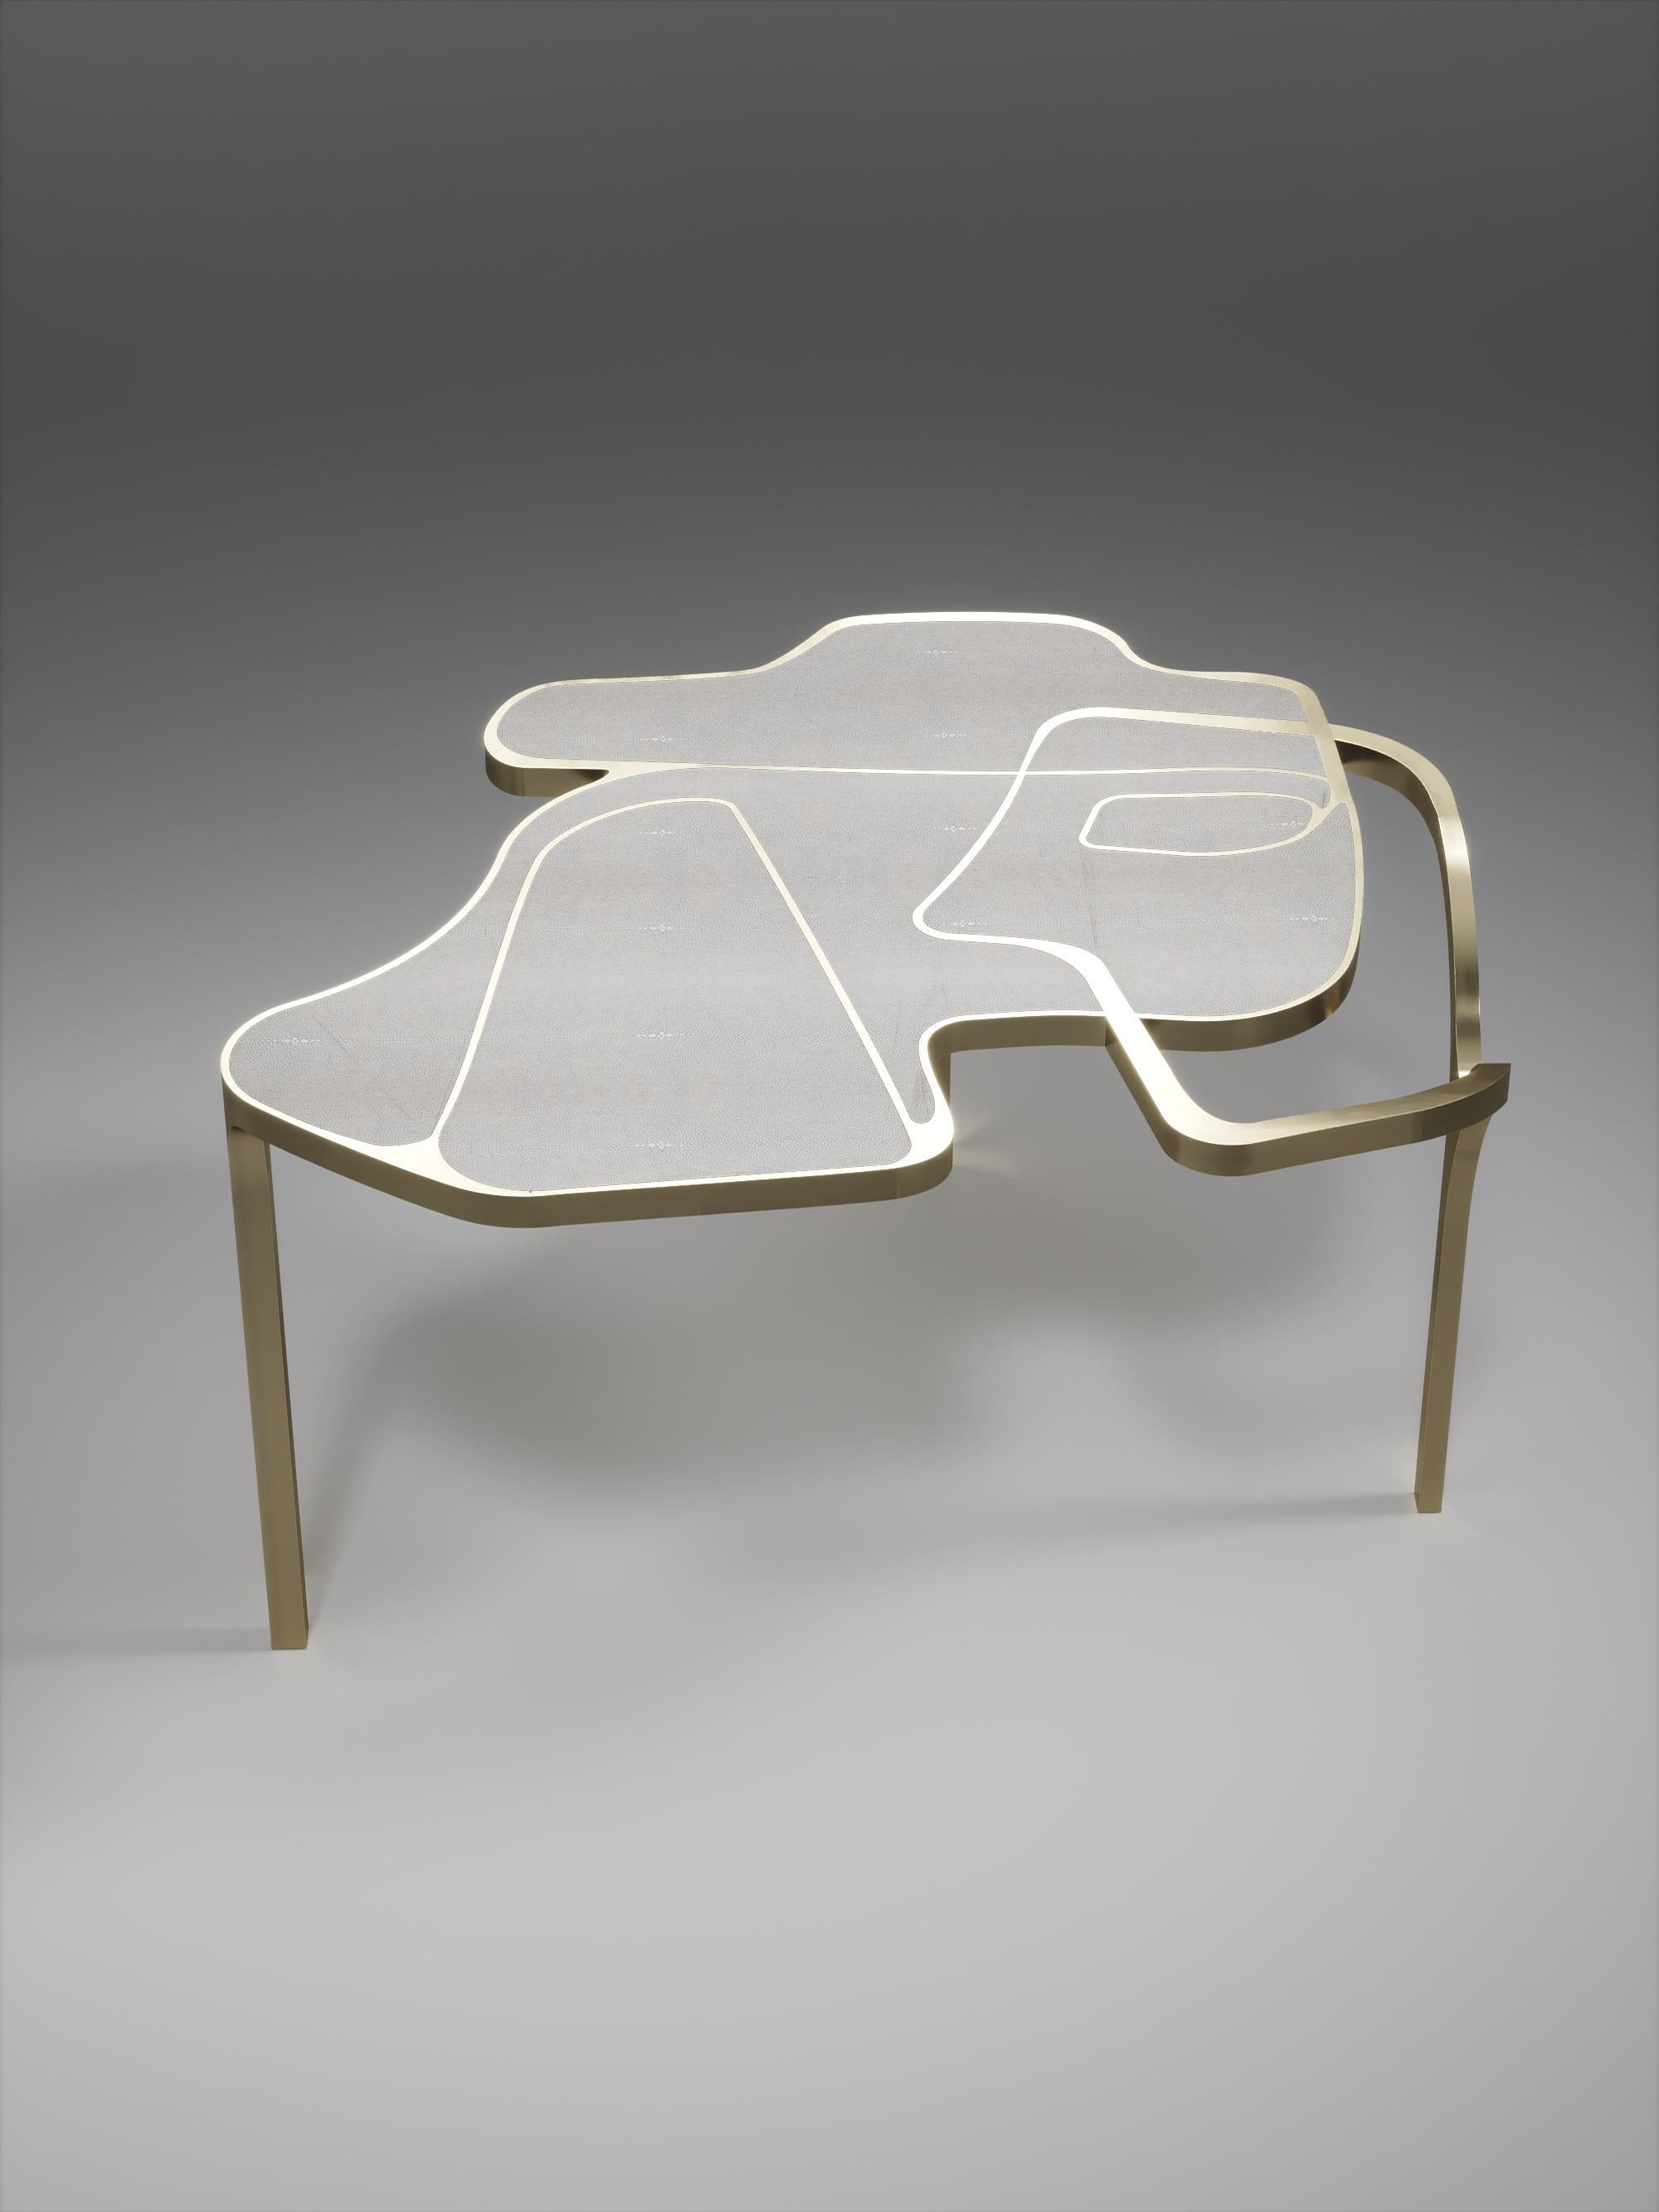 The Cocteau coffee table by R&Y Augousti is a truly one of a kind piece. The sculptural and ethereal piece has abstract forms, shapes and figures within it that one could interpret in different ways. The bronze-patina brass inserts in the cream